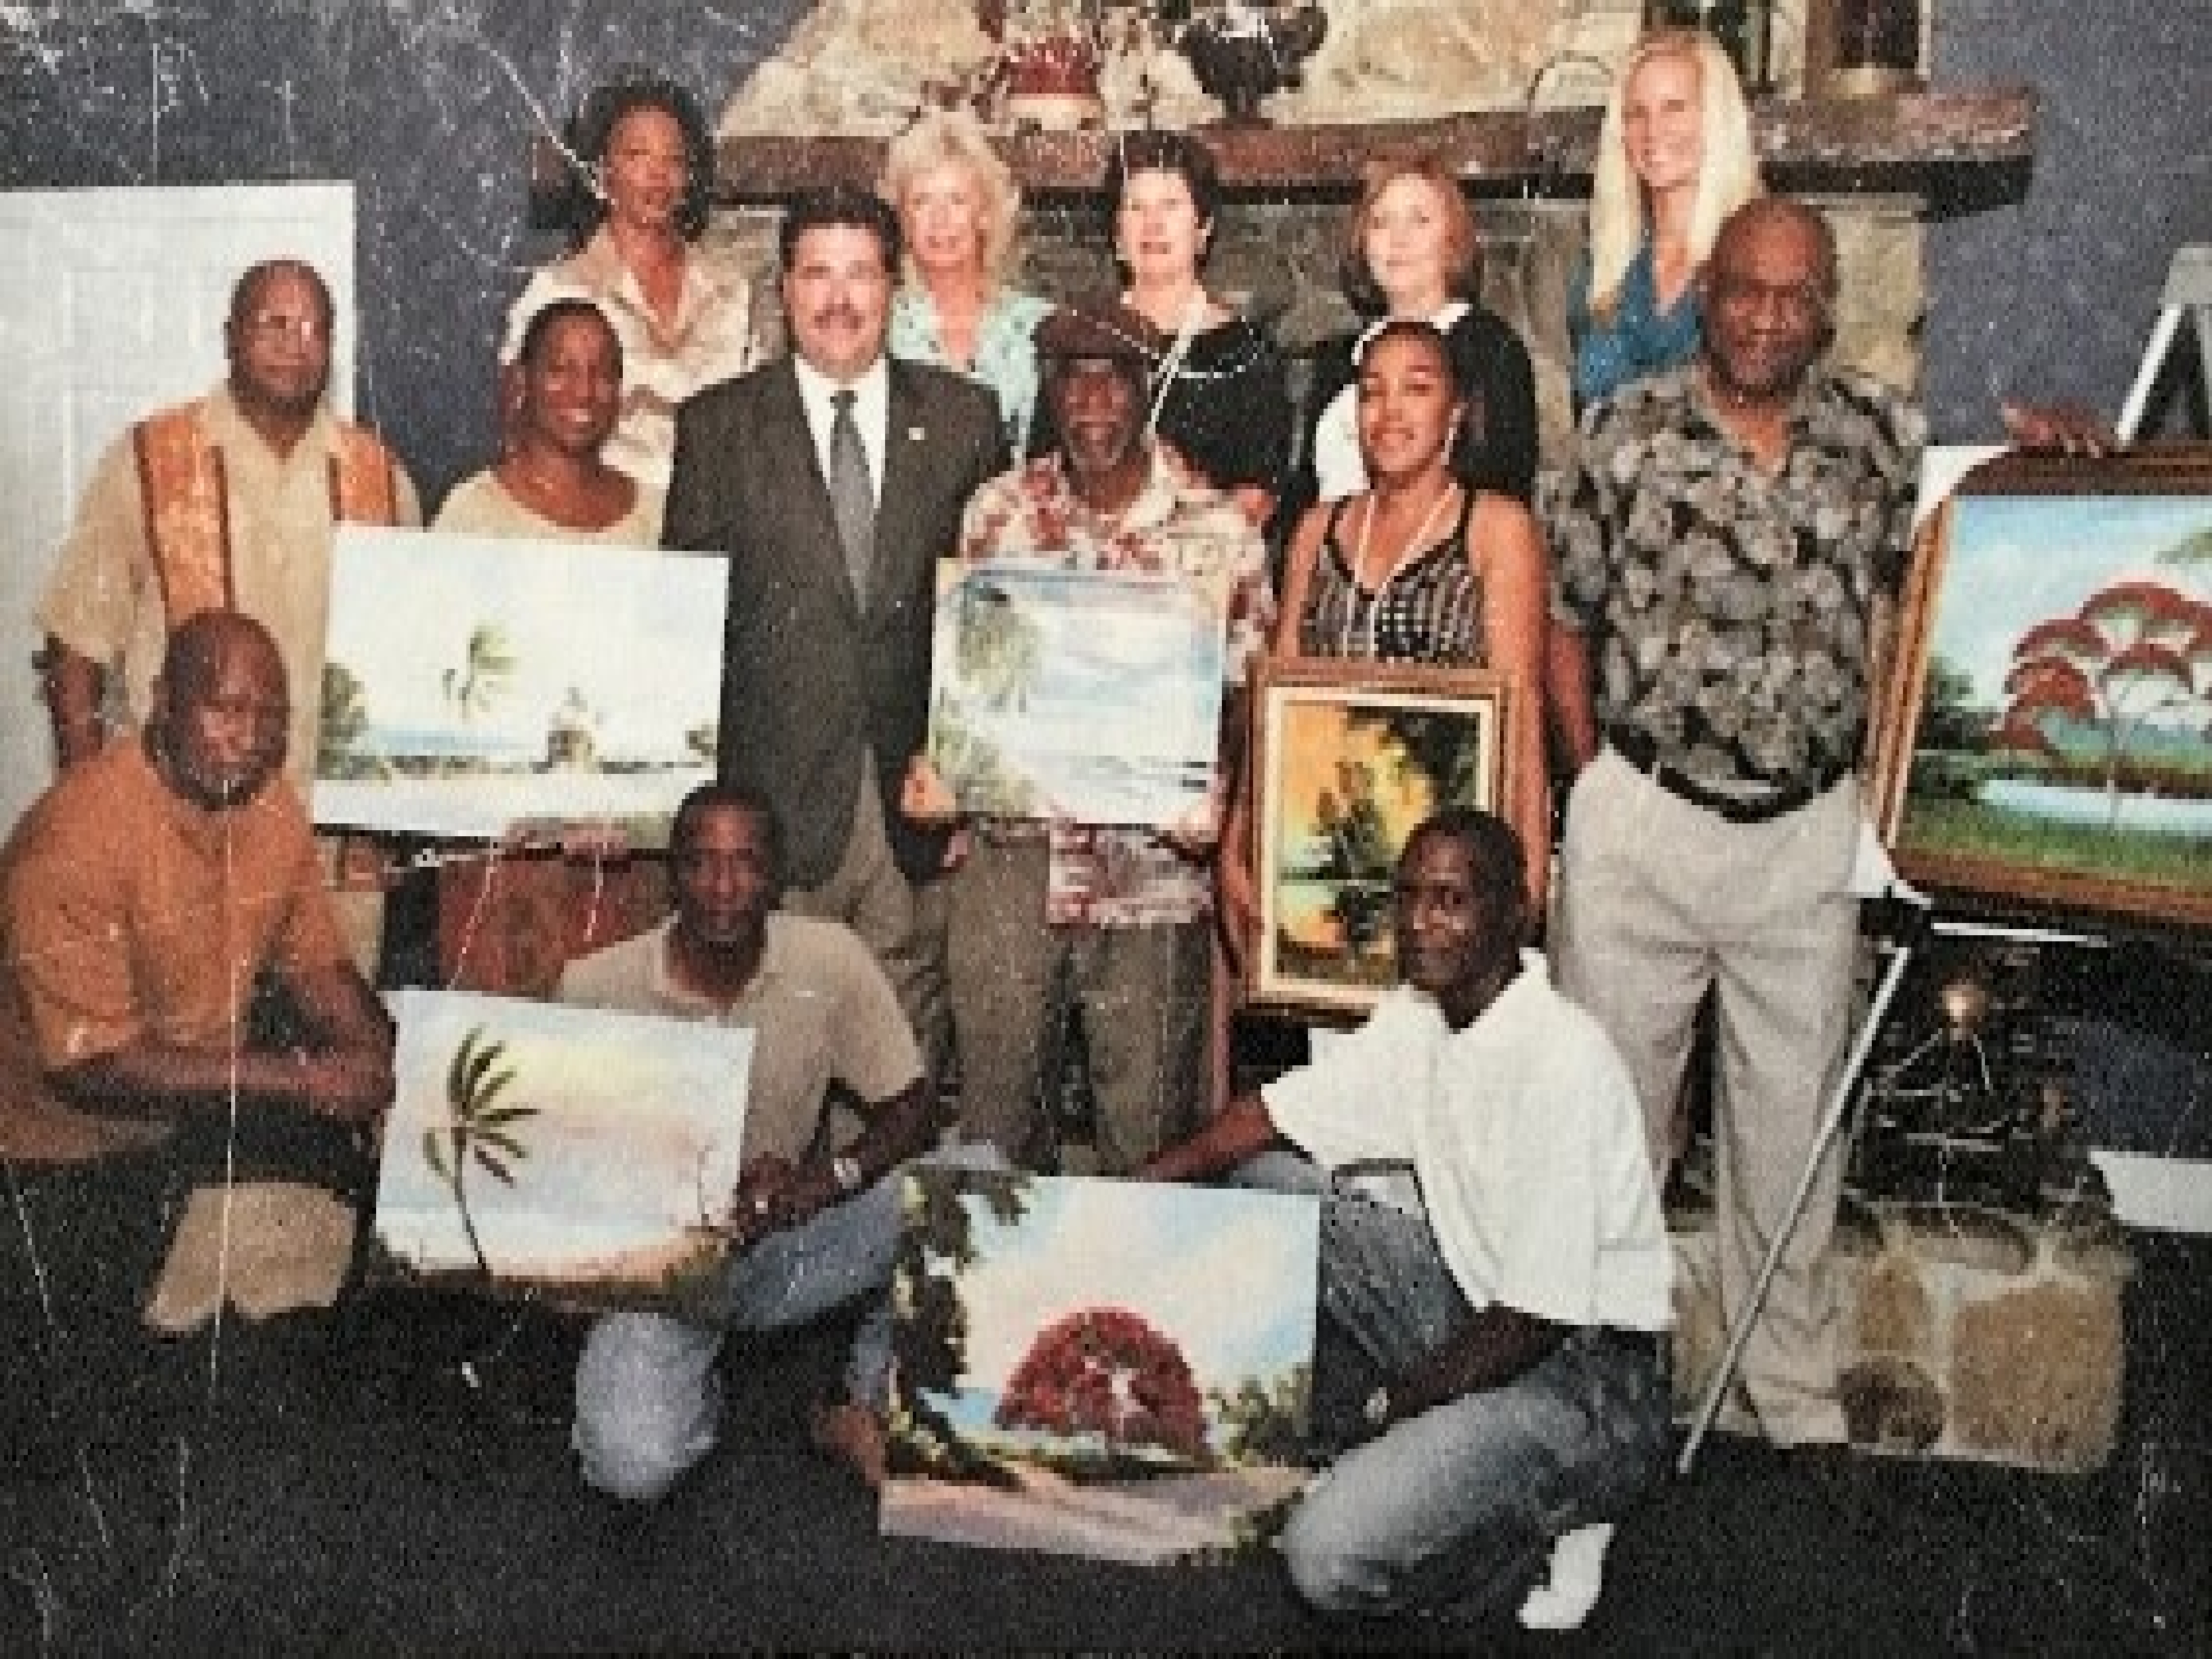 Florida Highwaymen Painters, Willie Reagan and members seen hear are a part of the Highwaymen Trail